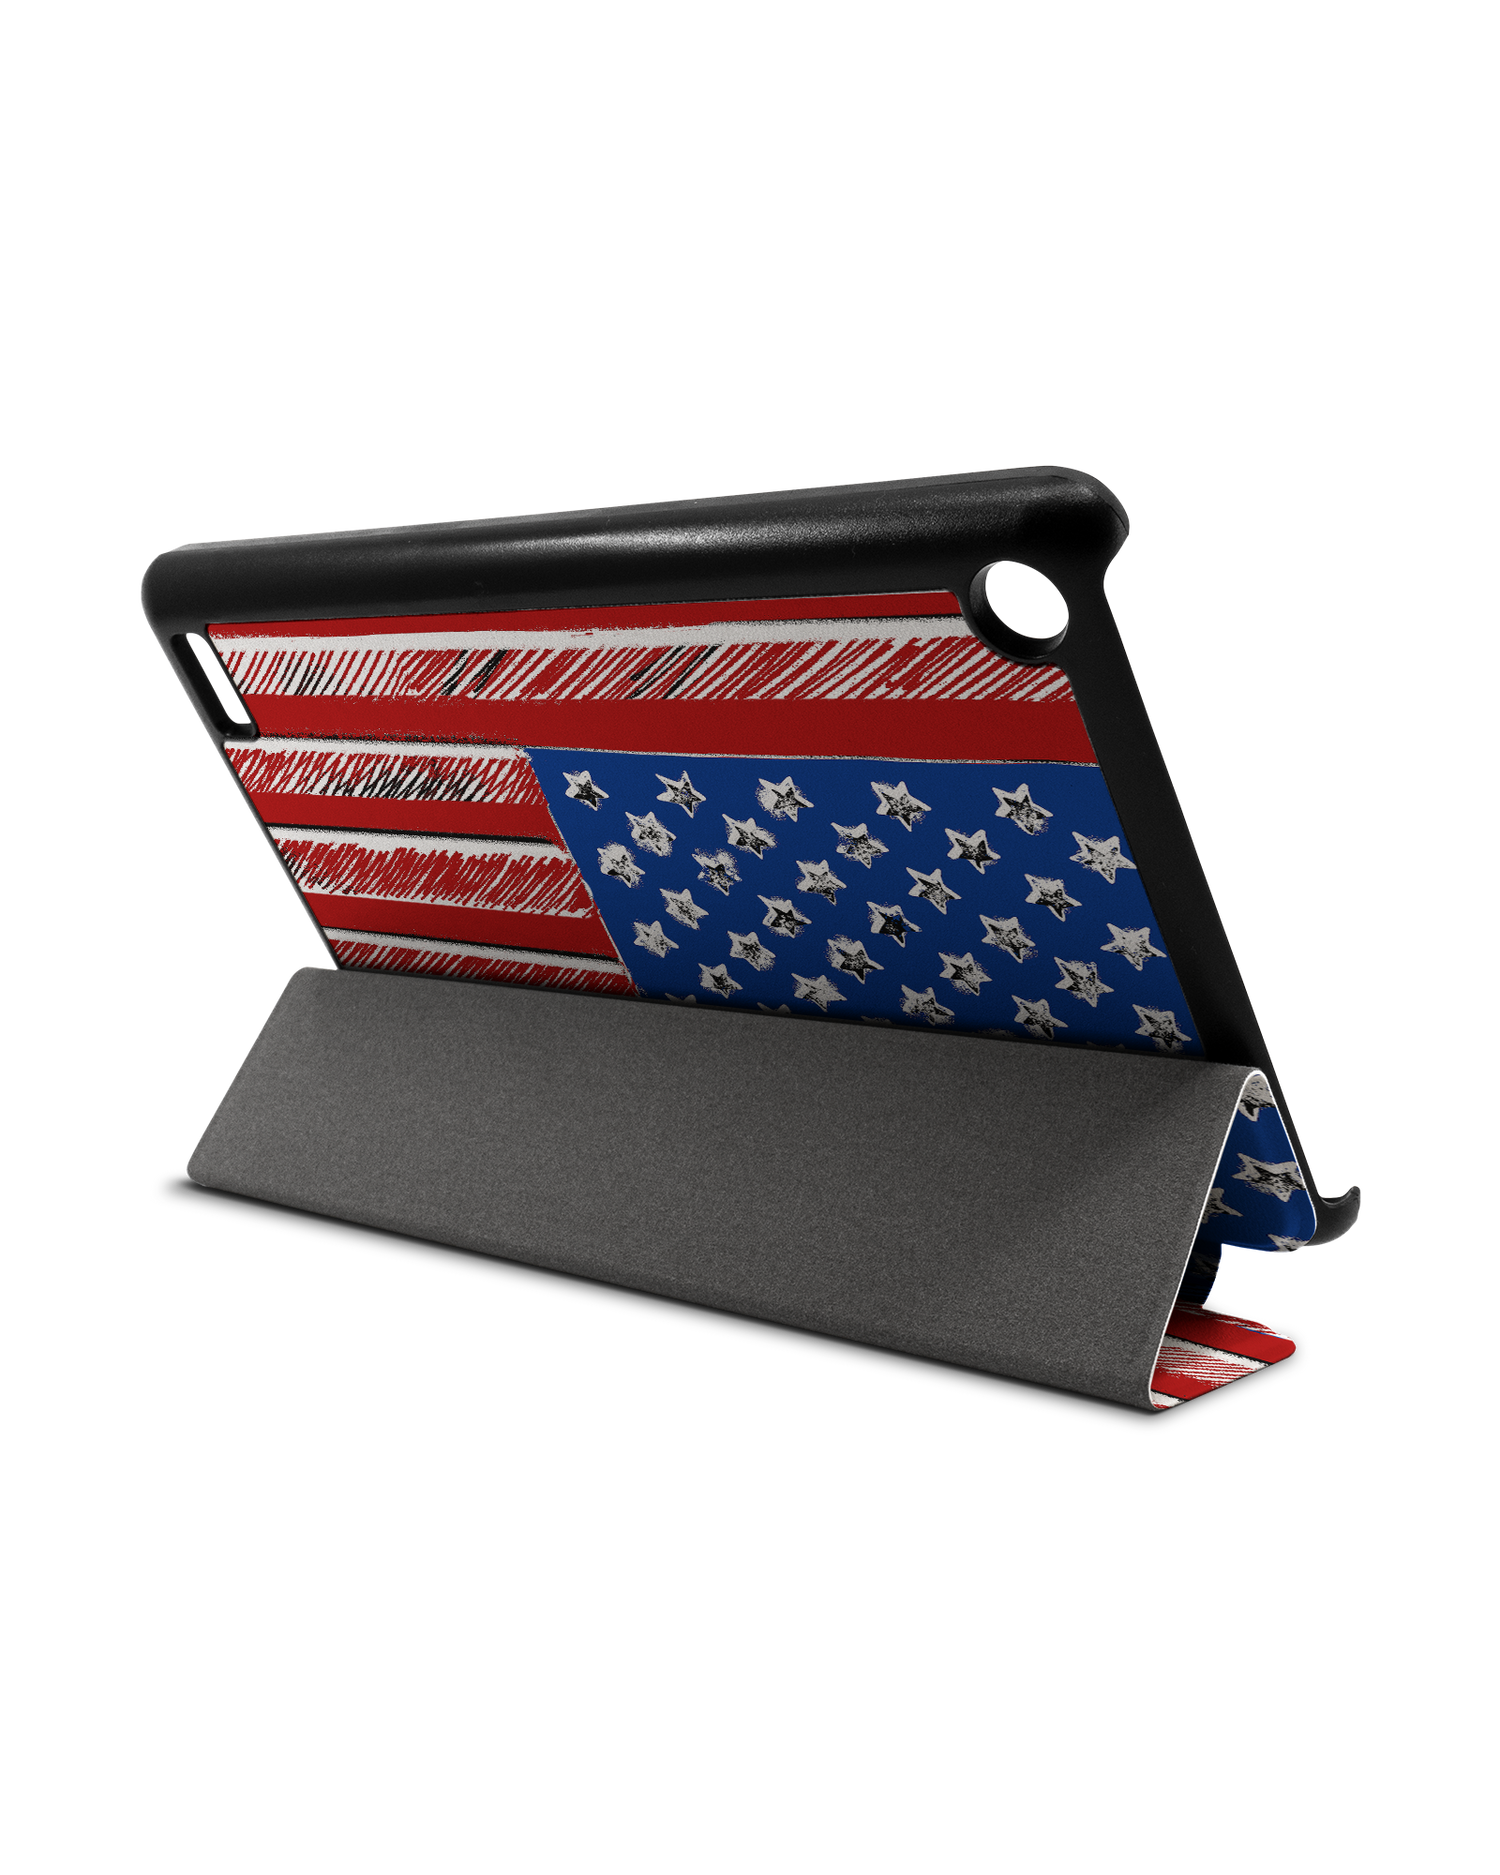 American Flag Color Tablet Smart Case for Amazon Fire 7: Used as Stand